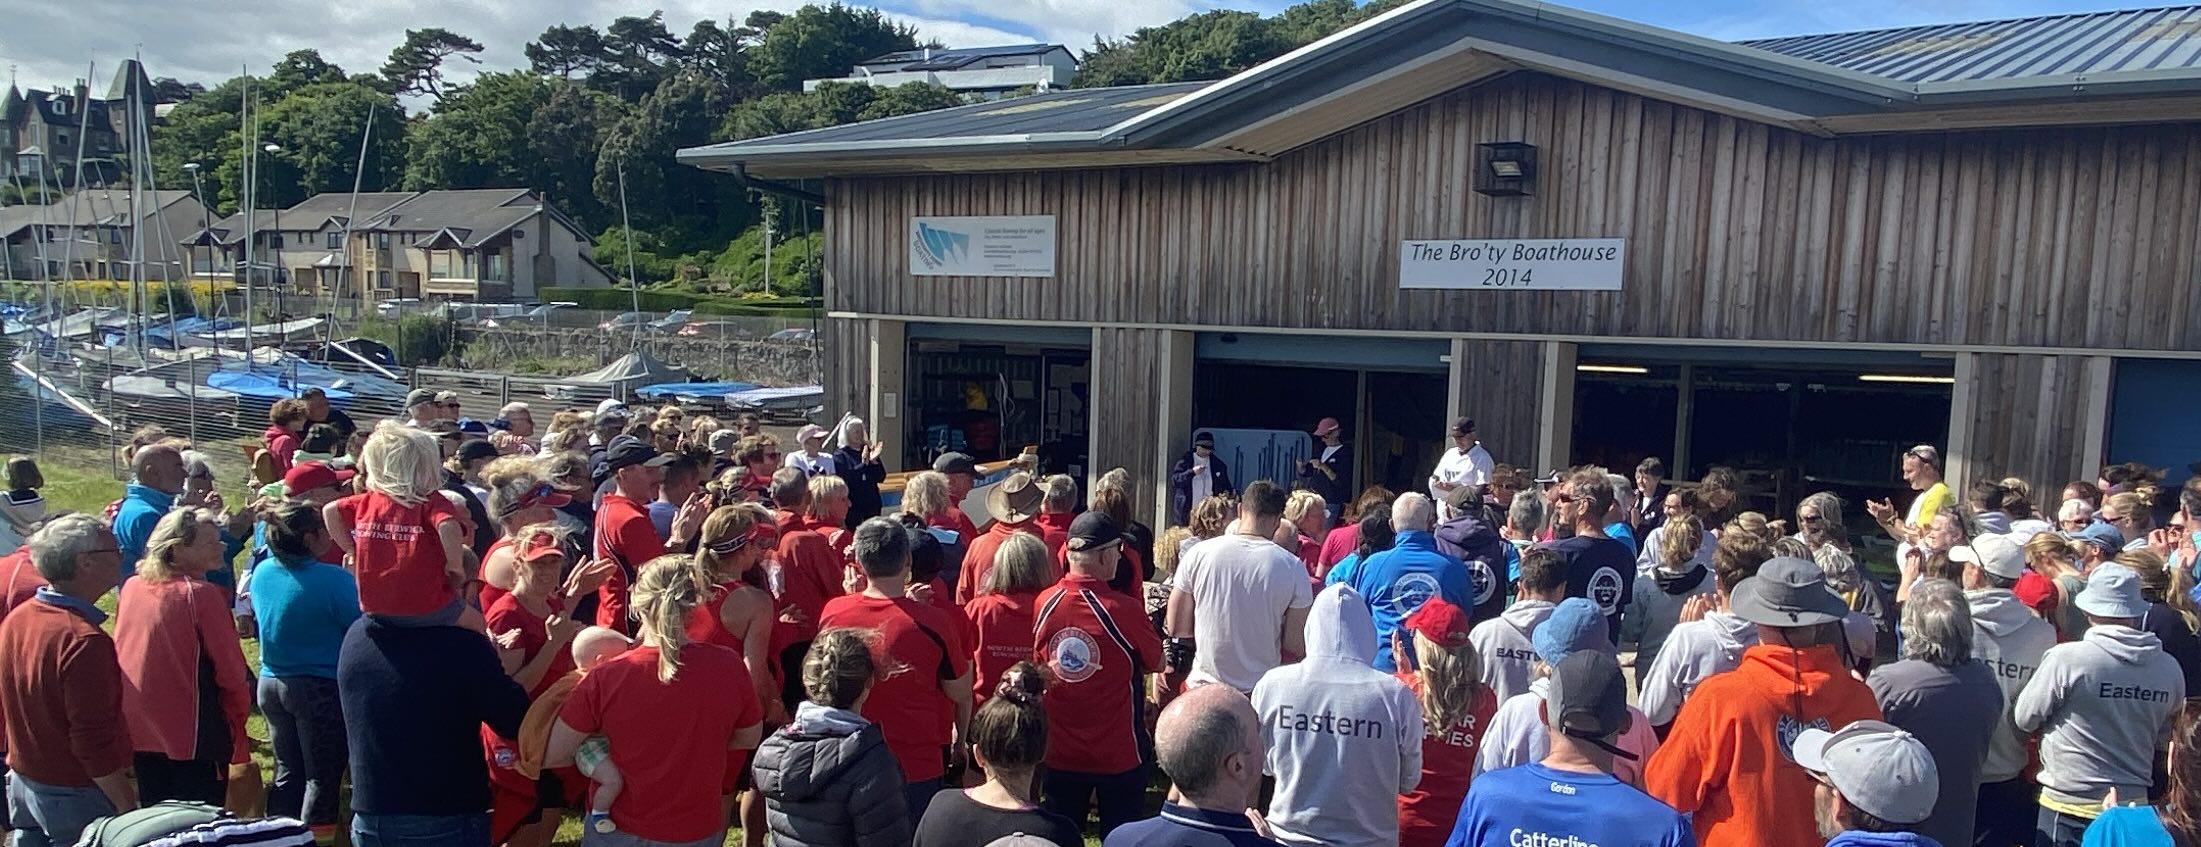 Great club turnout at Broughty Ferry racing regatta